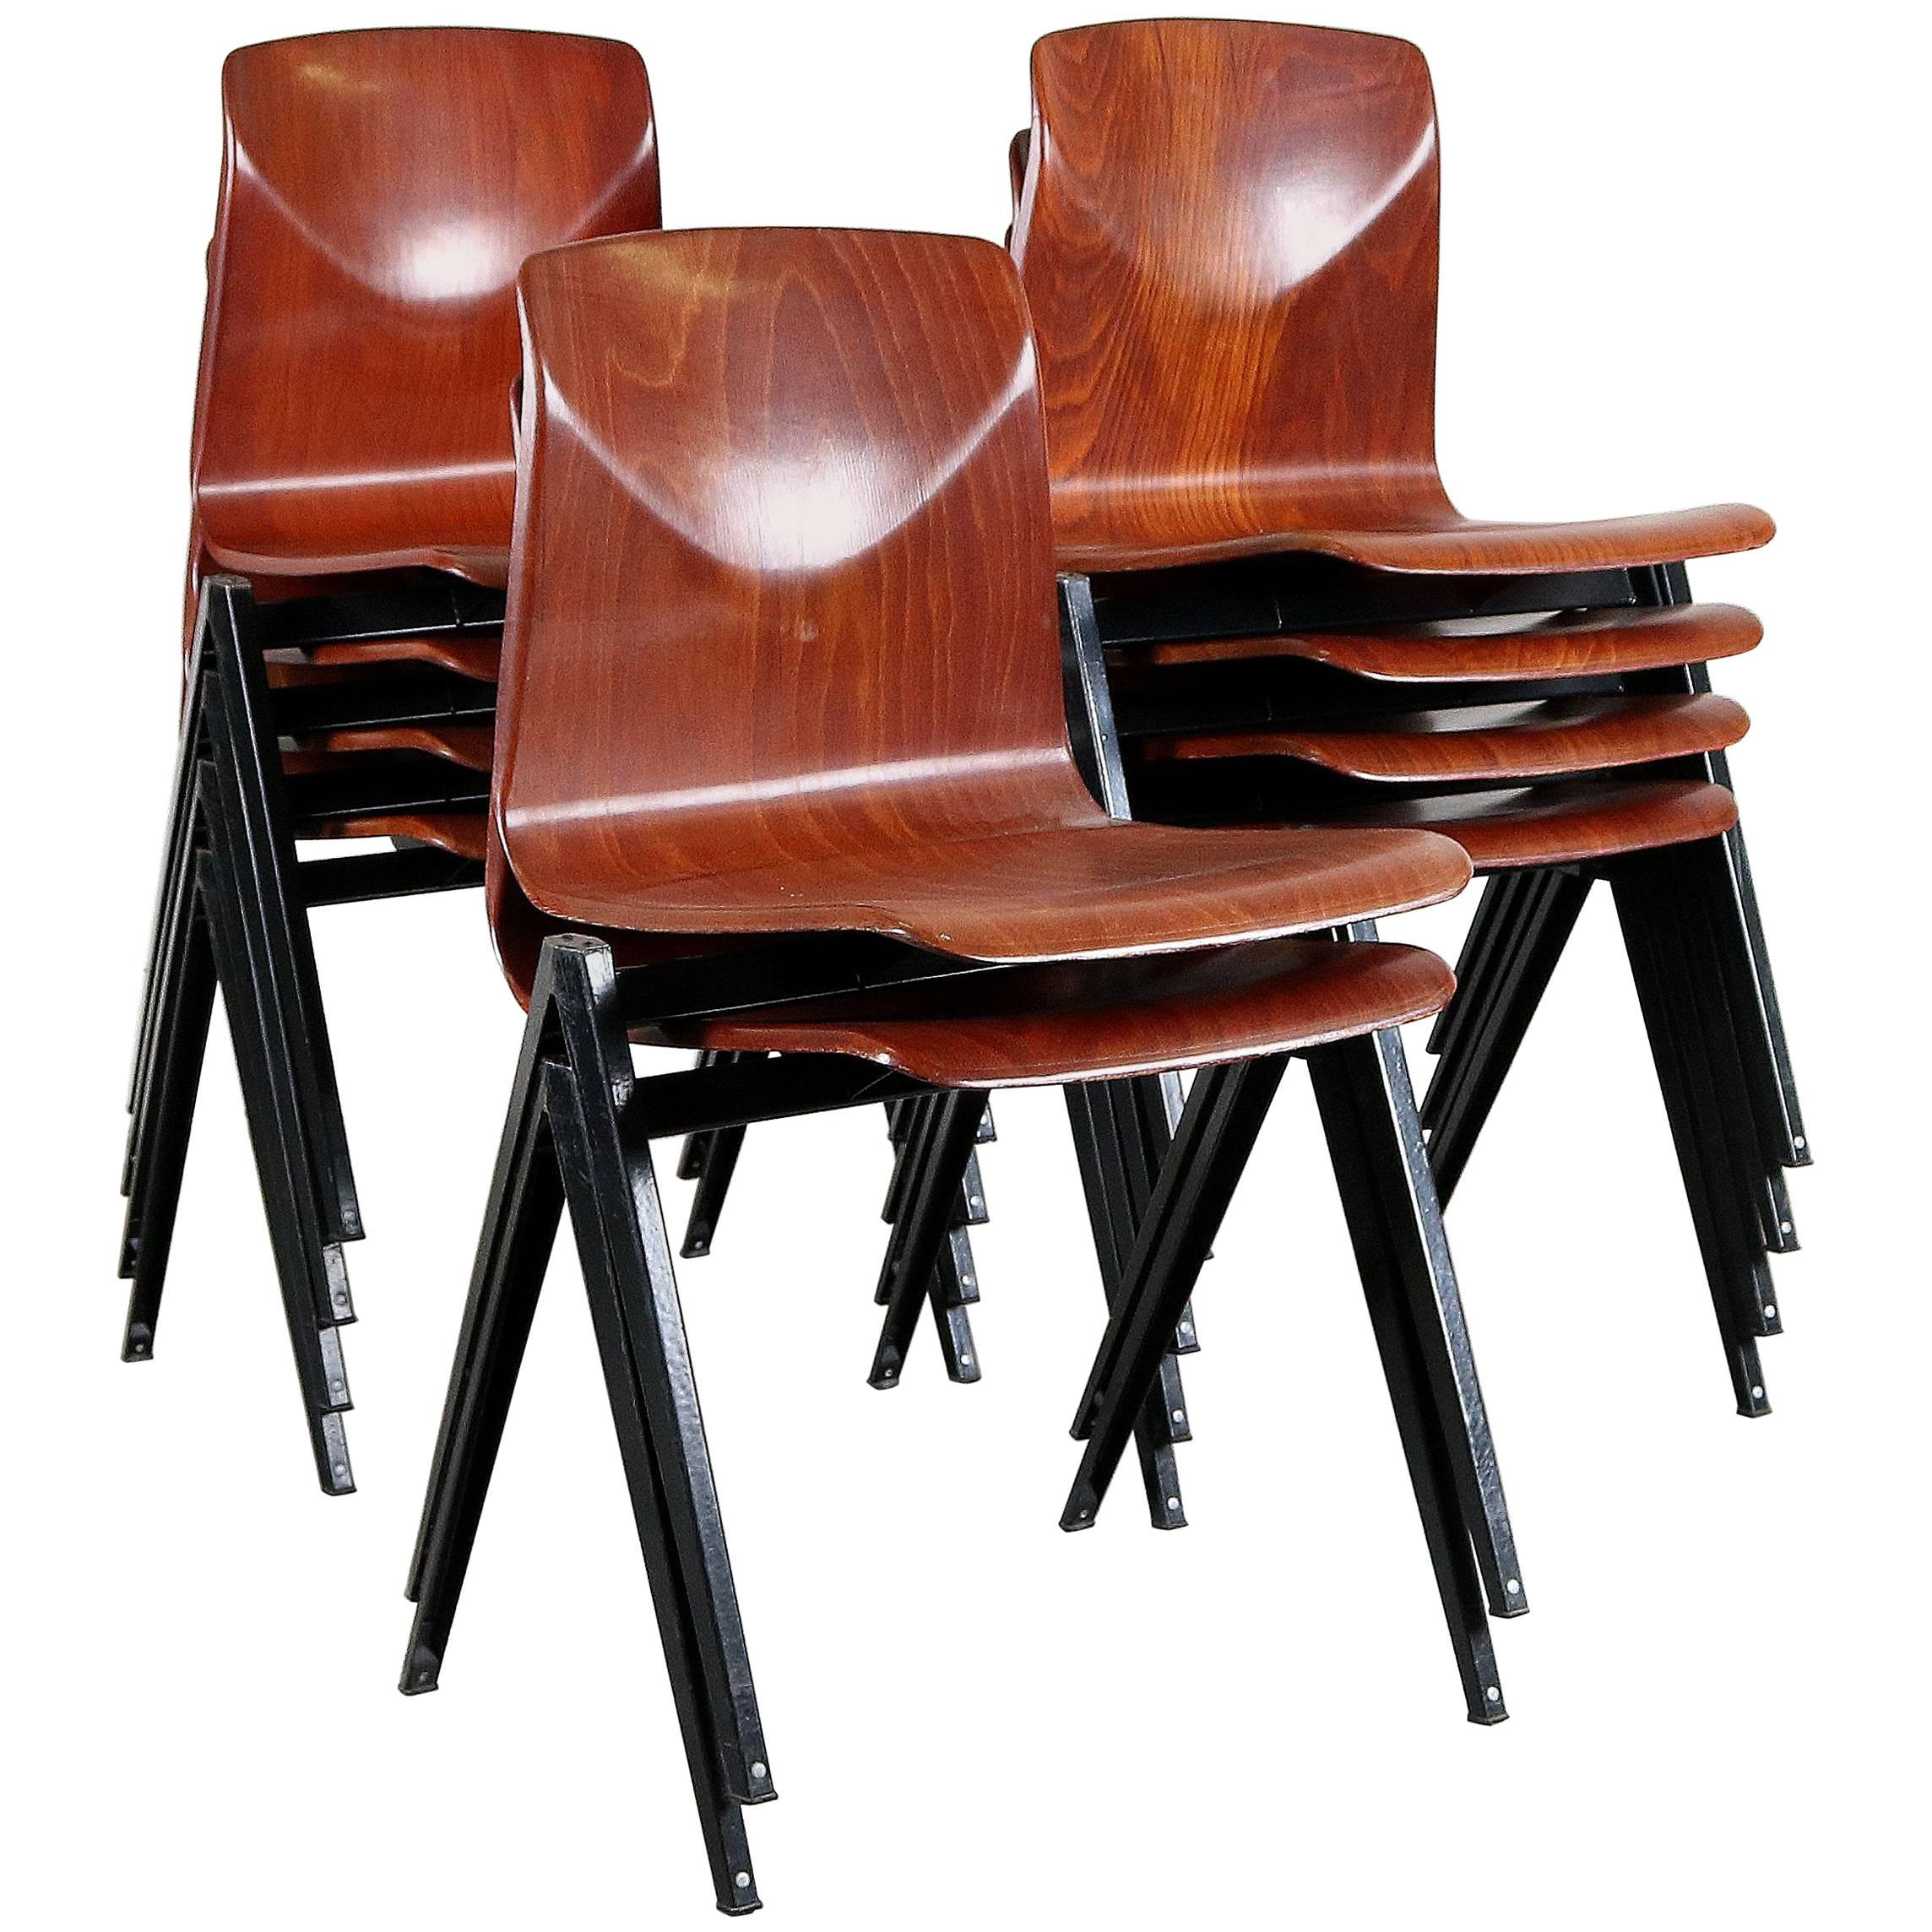 Ten Pagholz Chairs For Sale